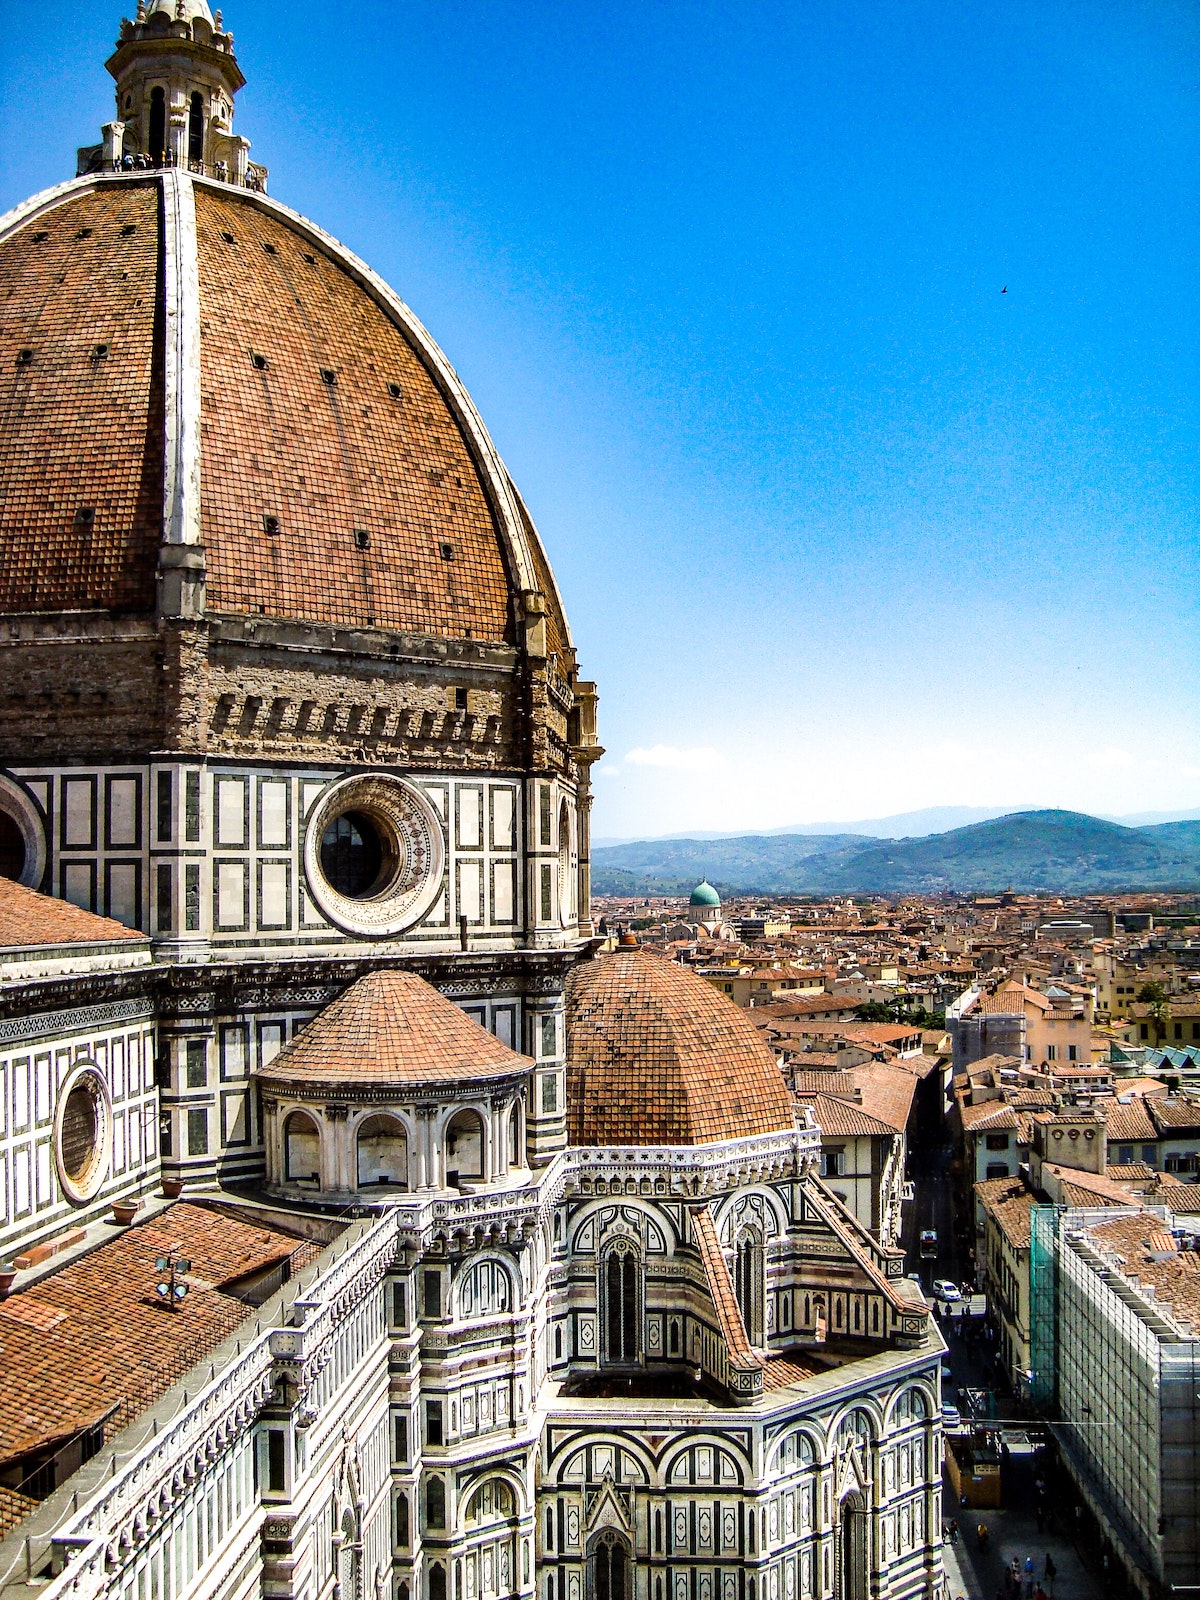 View of Florence, Italy's cathedral dome and the city beyond it on a clear day